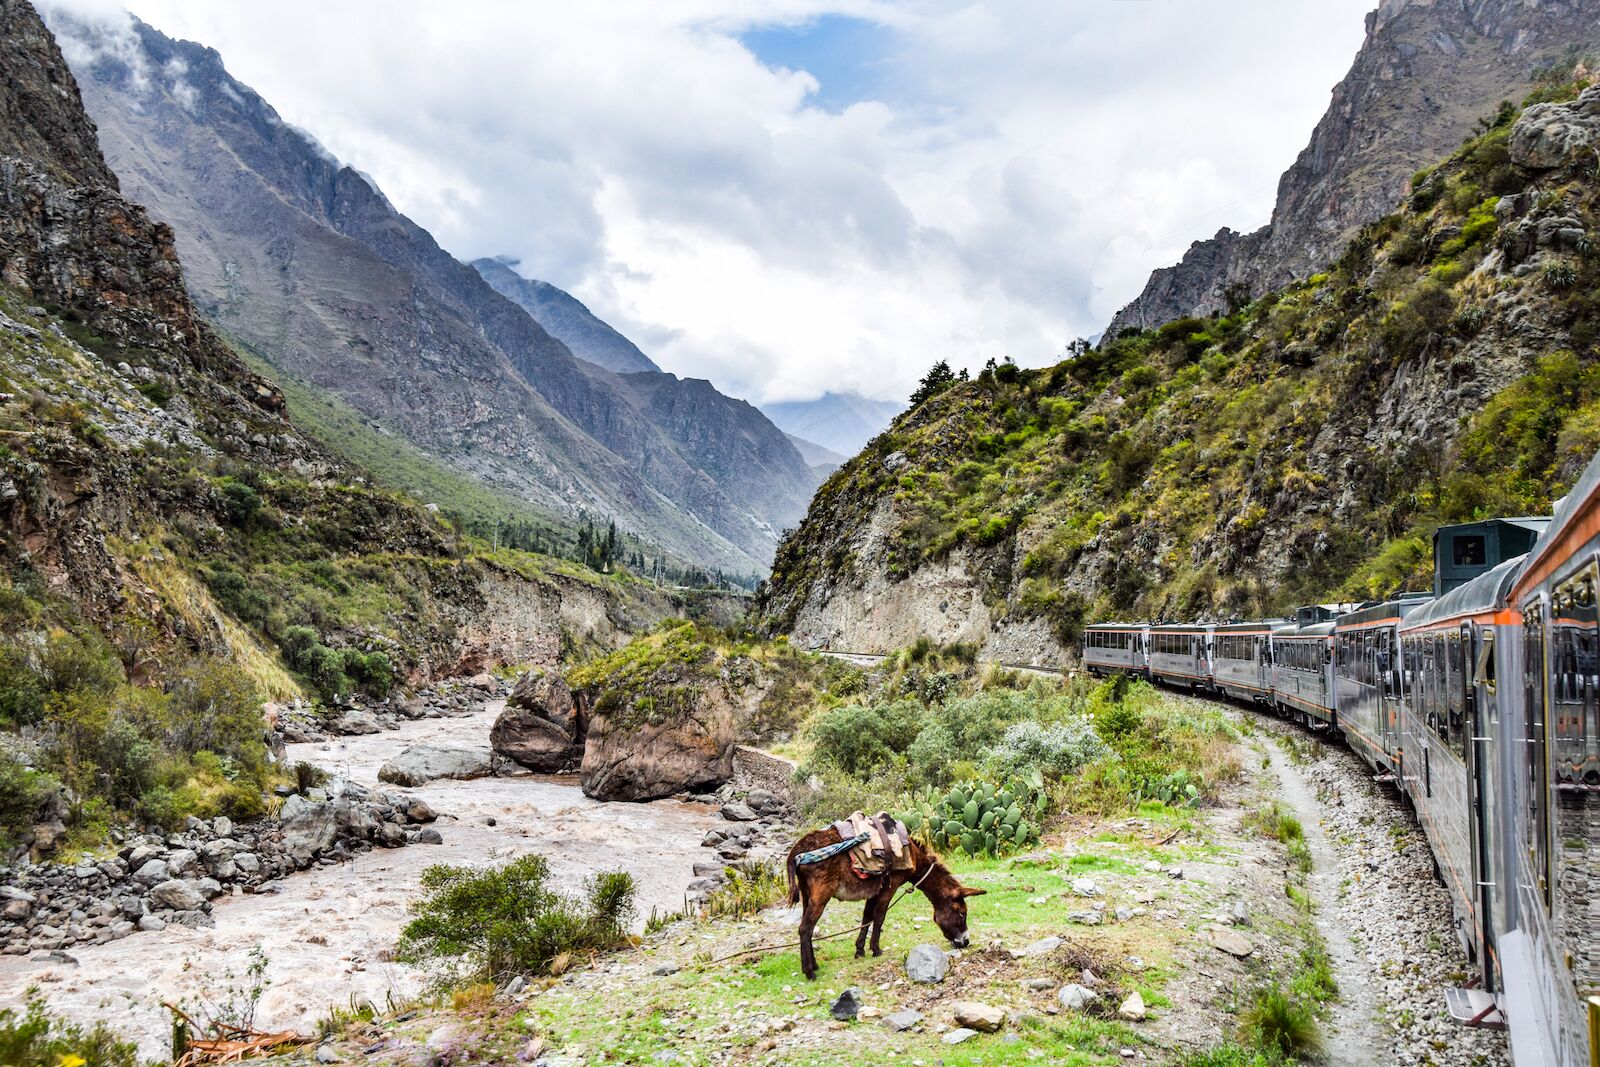 Inca Rail Peru - horse and saddle in valley on way to machu picchu 